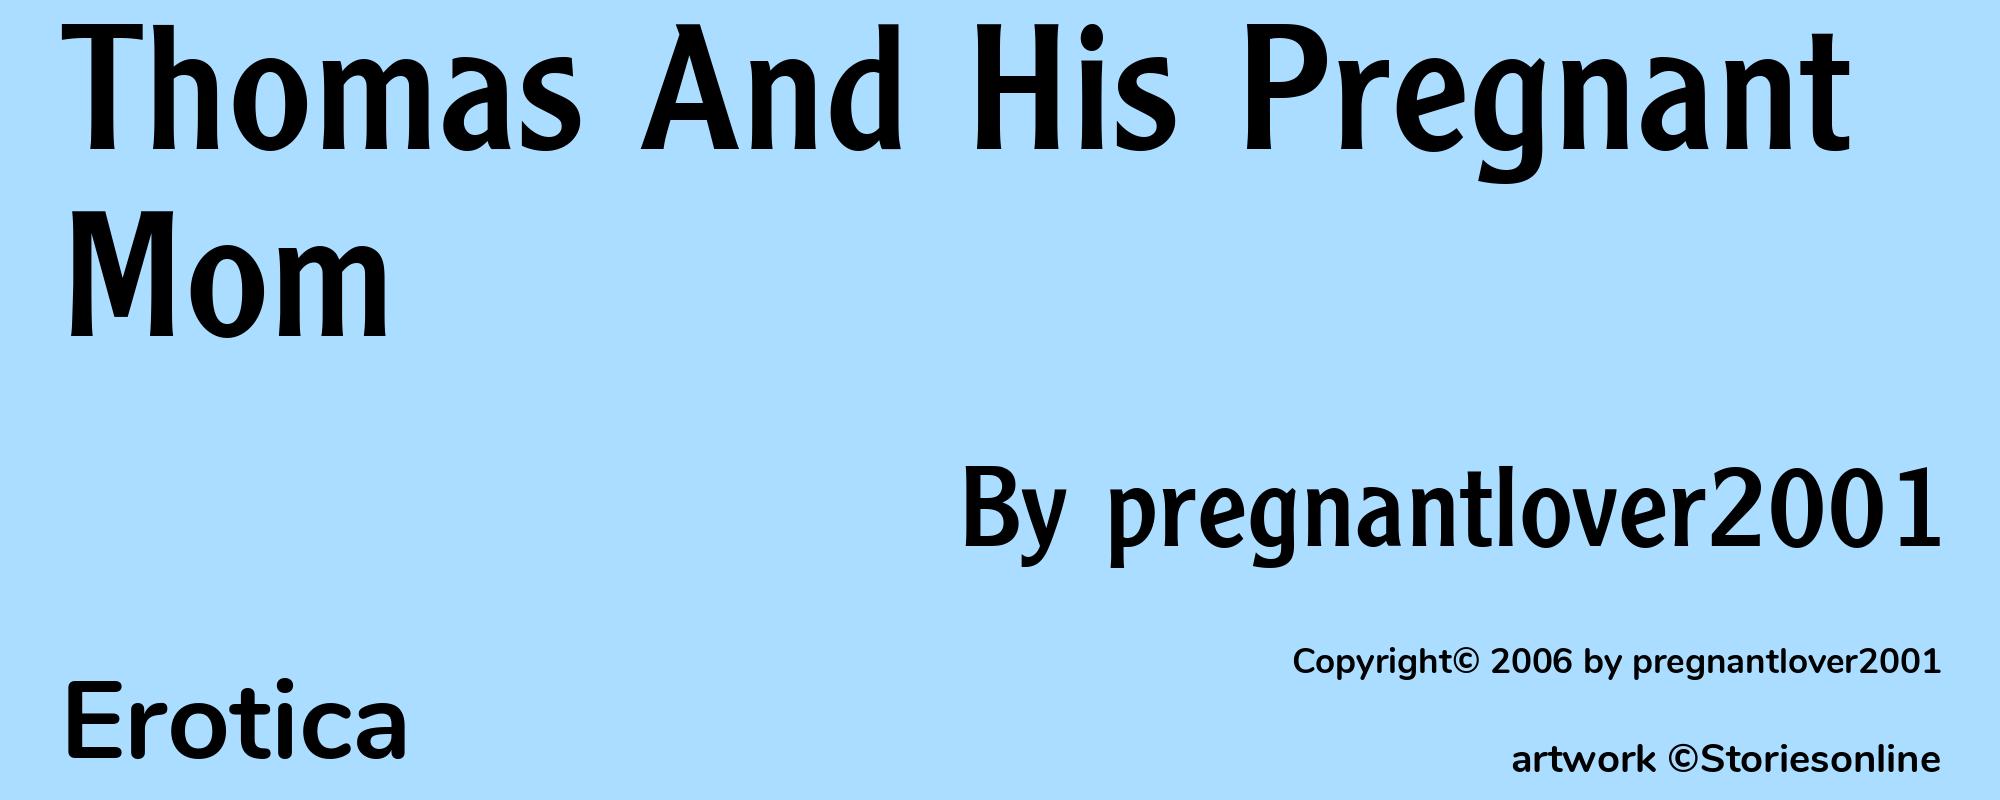 Thomas And His Pregnant Mom - Cover